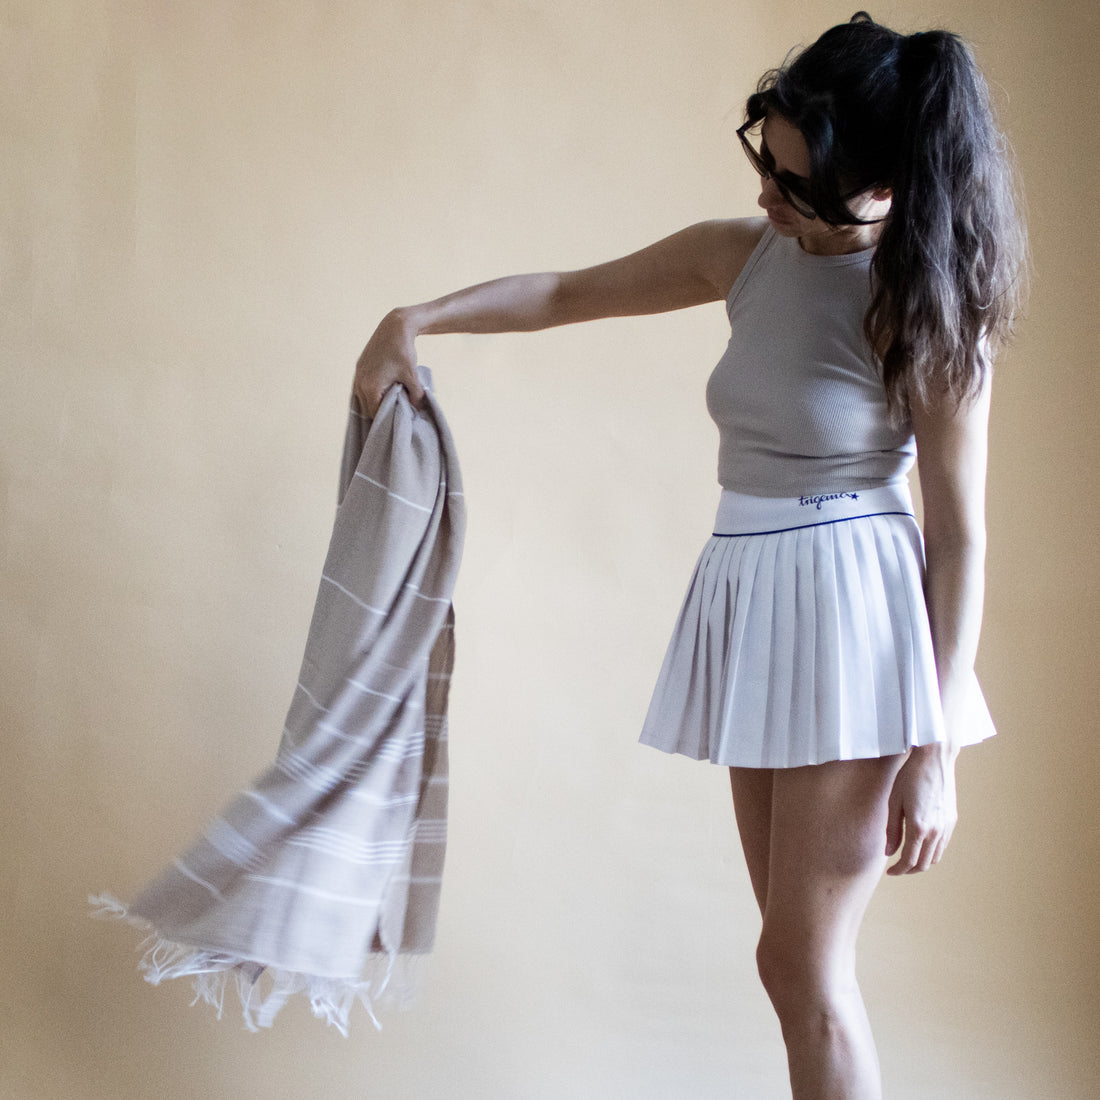 How to Choose the Perfect Size Turkish Towel for Ultimate Comfort and Style